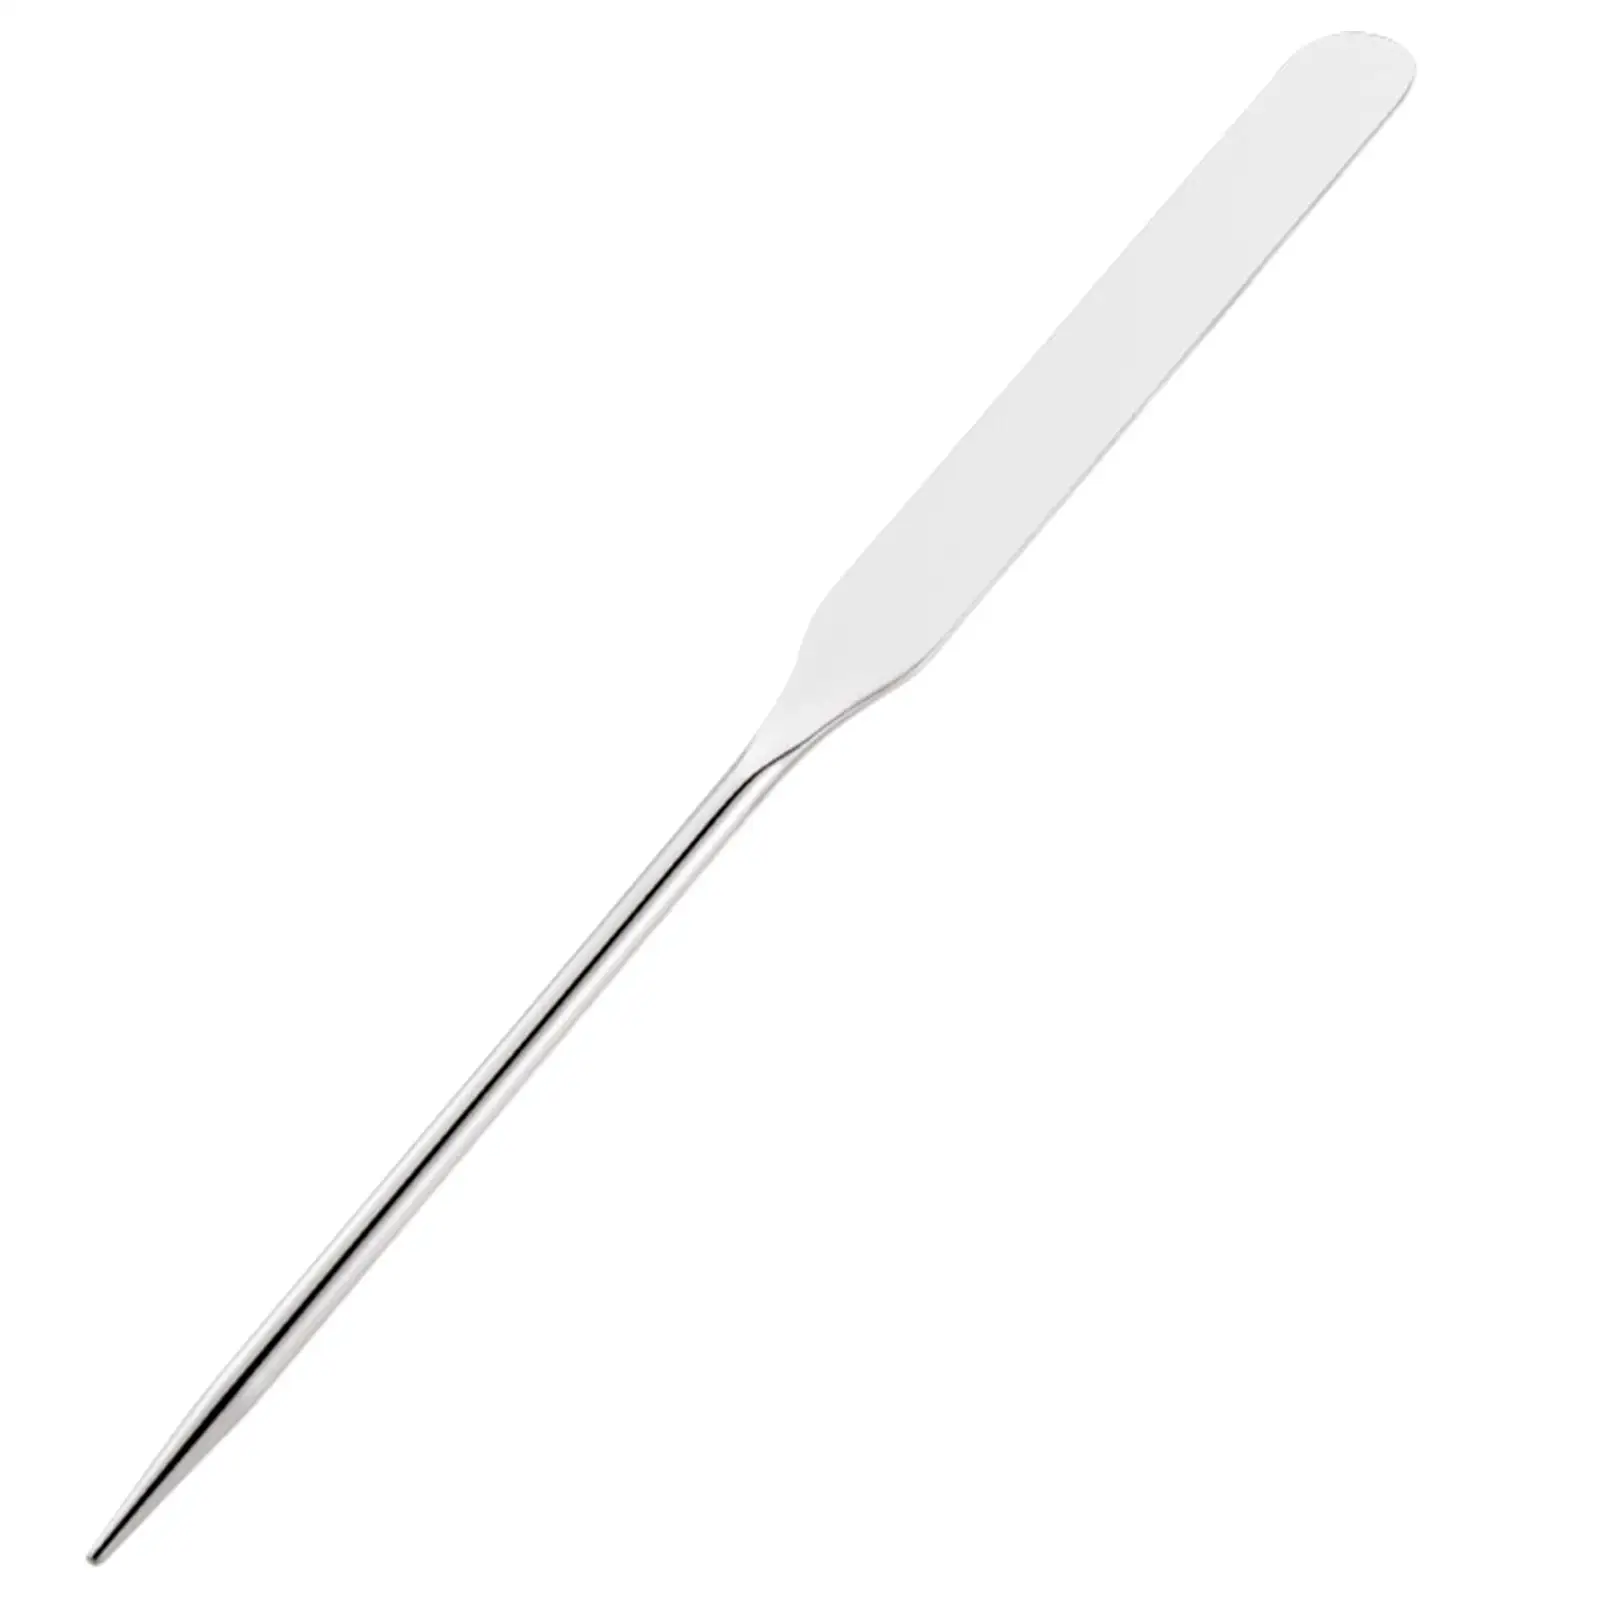 Stainless Steel Cosmetics Mixing Spatula Length 6.5 Inch Durable Accessories